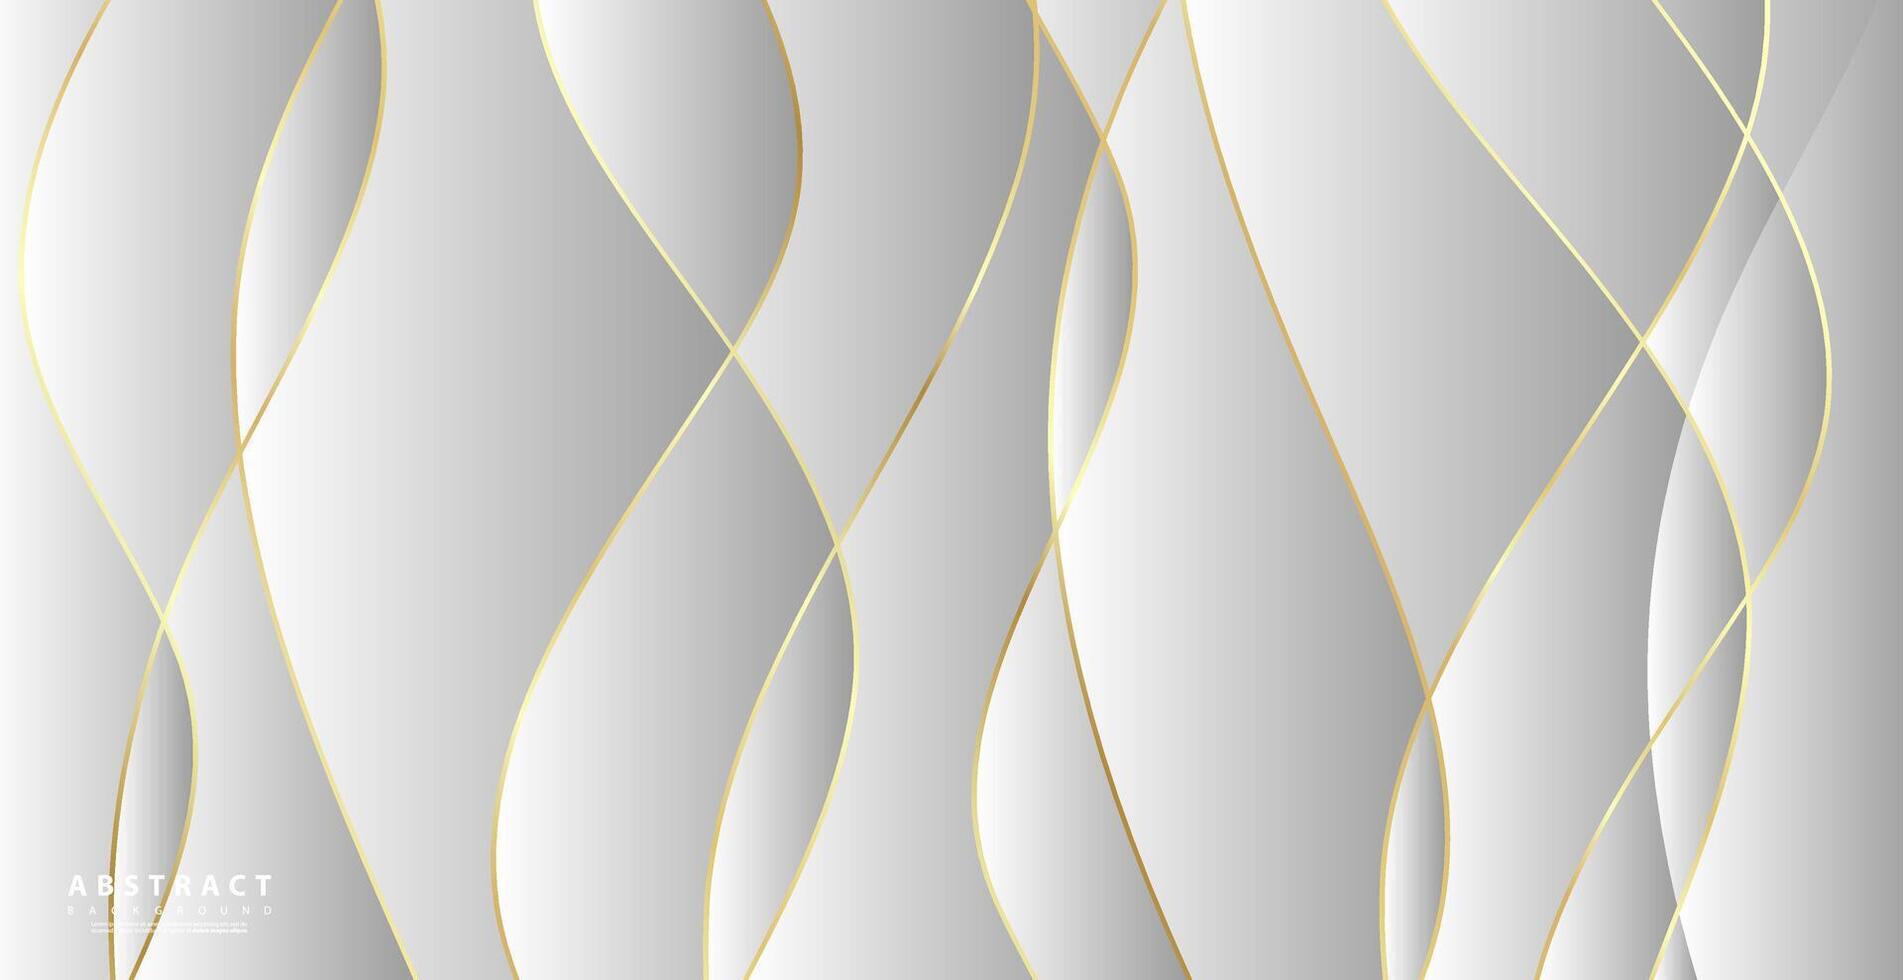 Abstract background with gold waves. Luxury paper cut background, golden pattern, halftone gradients, cover template, geometric shapes, modern minimal banner. 3d illustration. vector